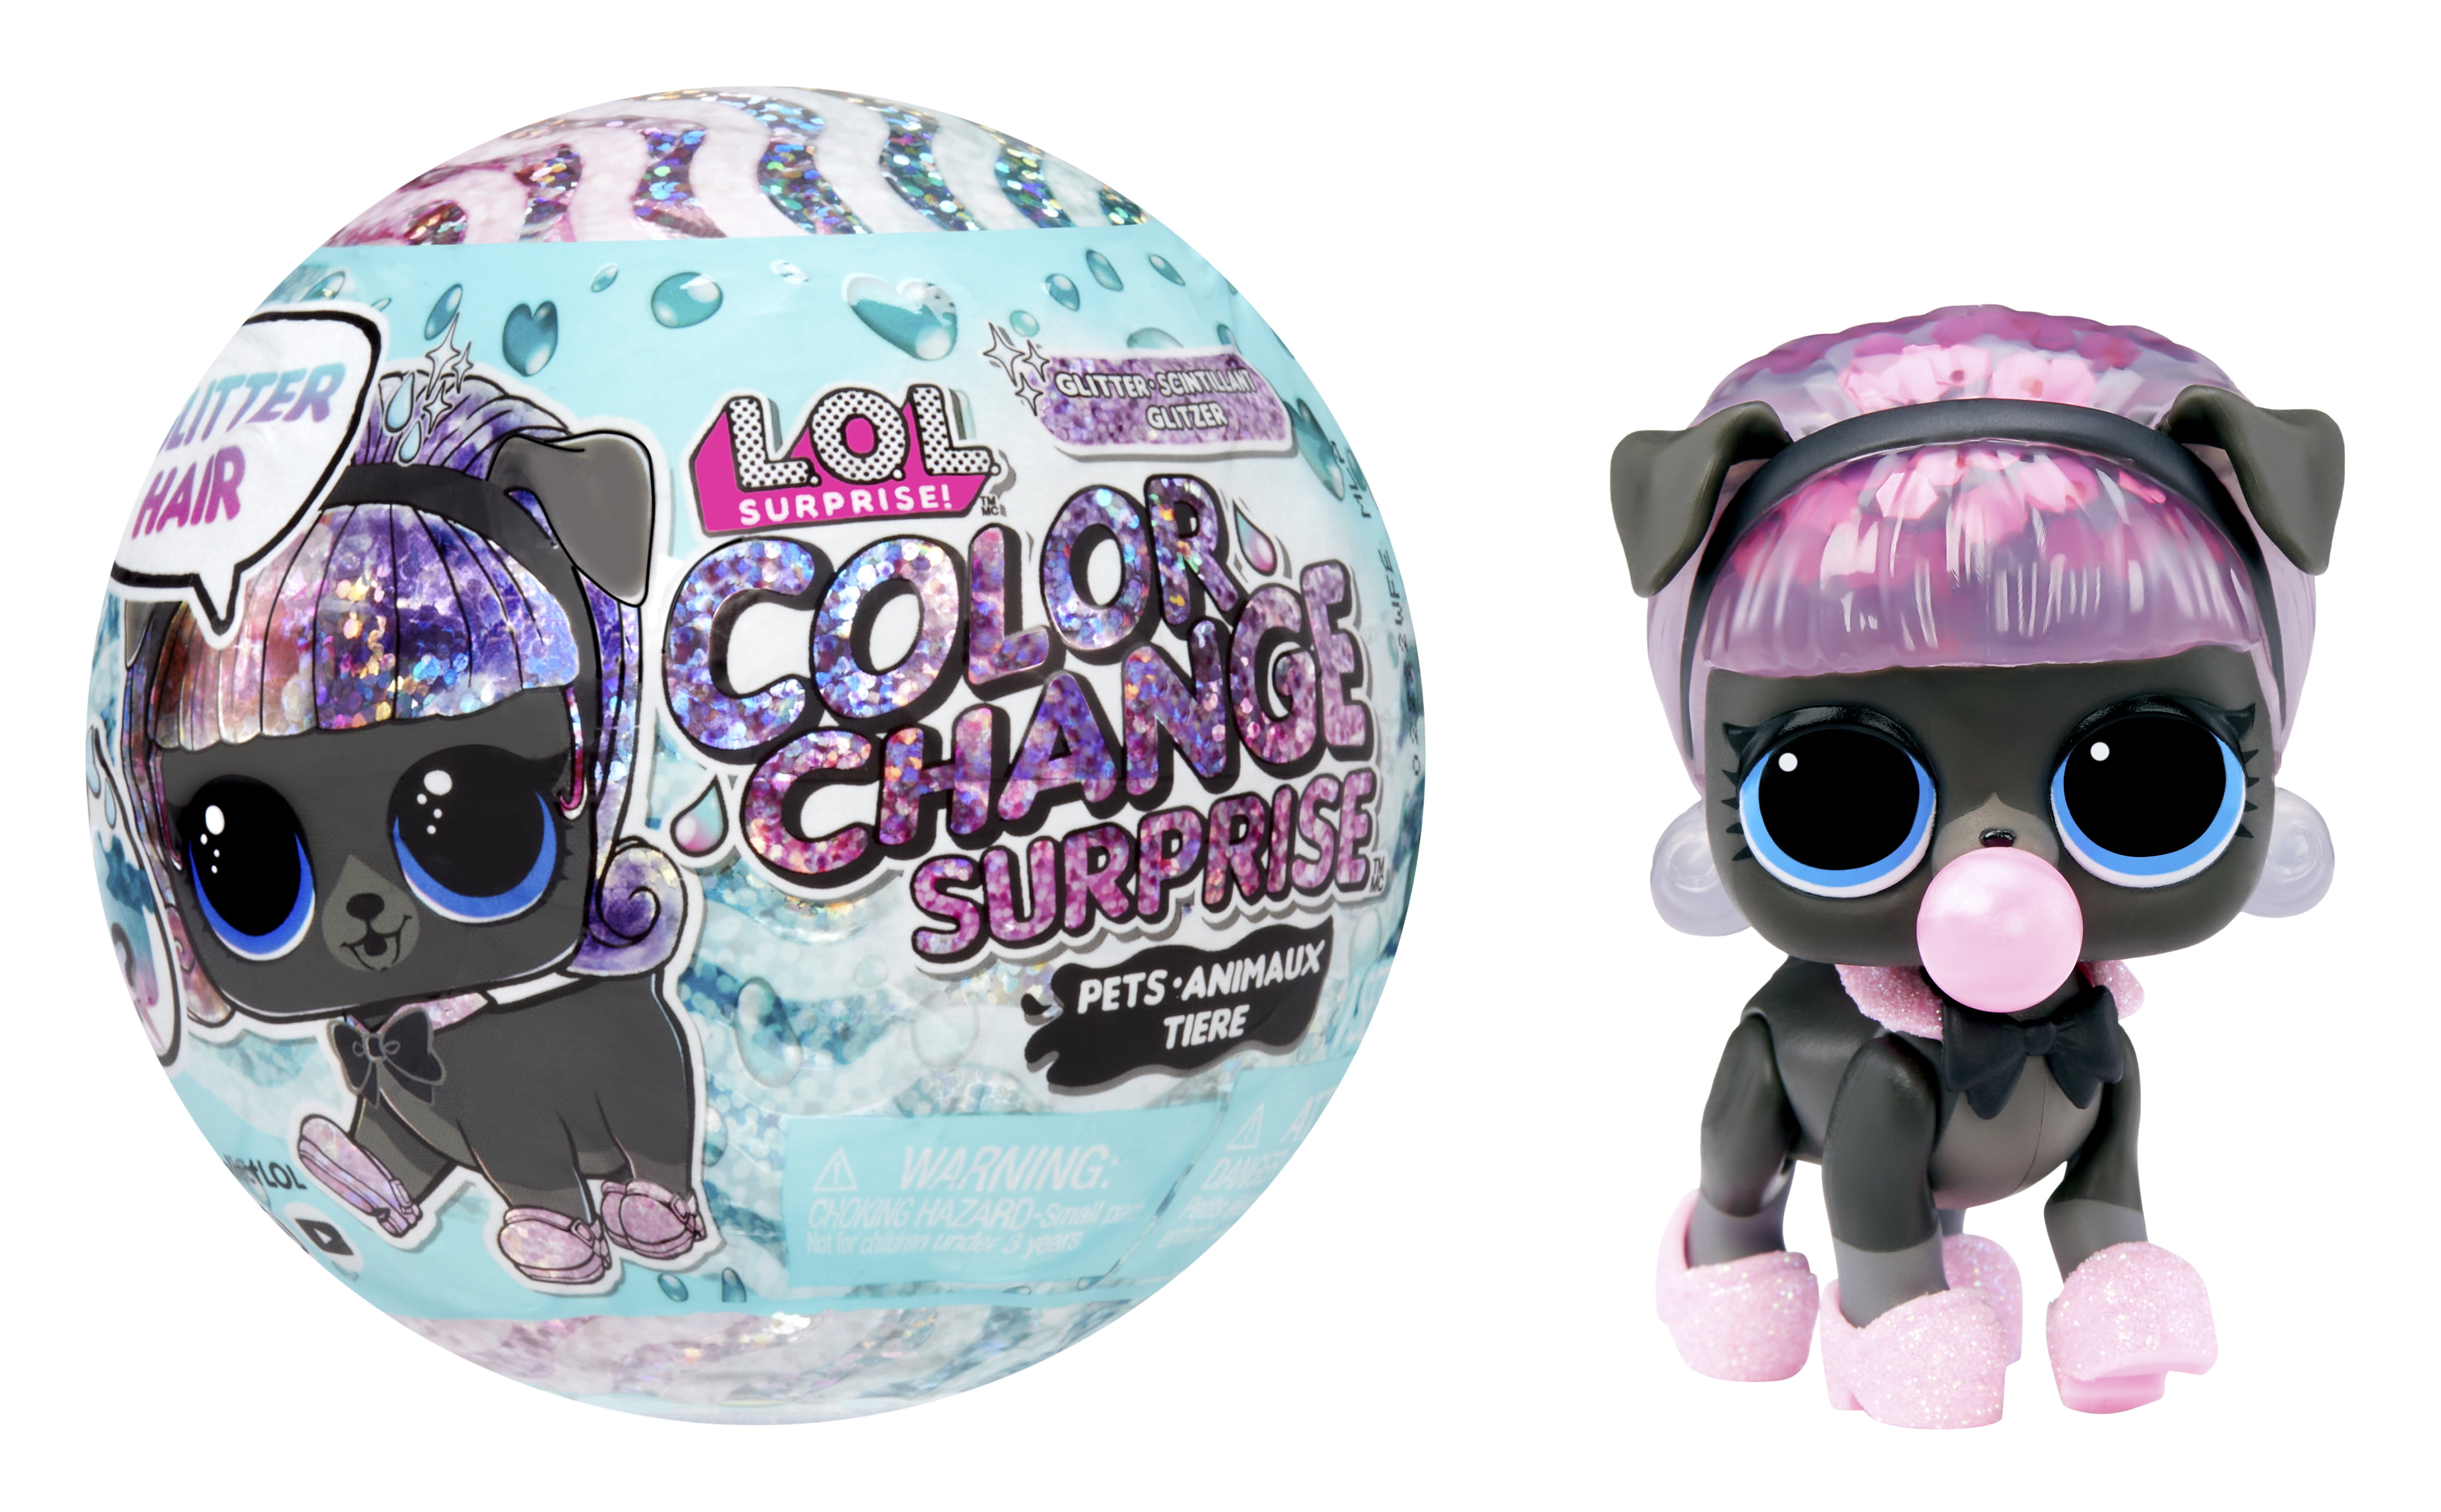 LOL Surprise Glitter Color Change Pets with 5 Surprises Including a Collectible Doll, Sparkly Fashions, and Accessories – Great Gift for Kids Children Ages 4+